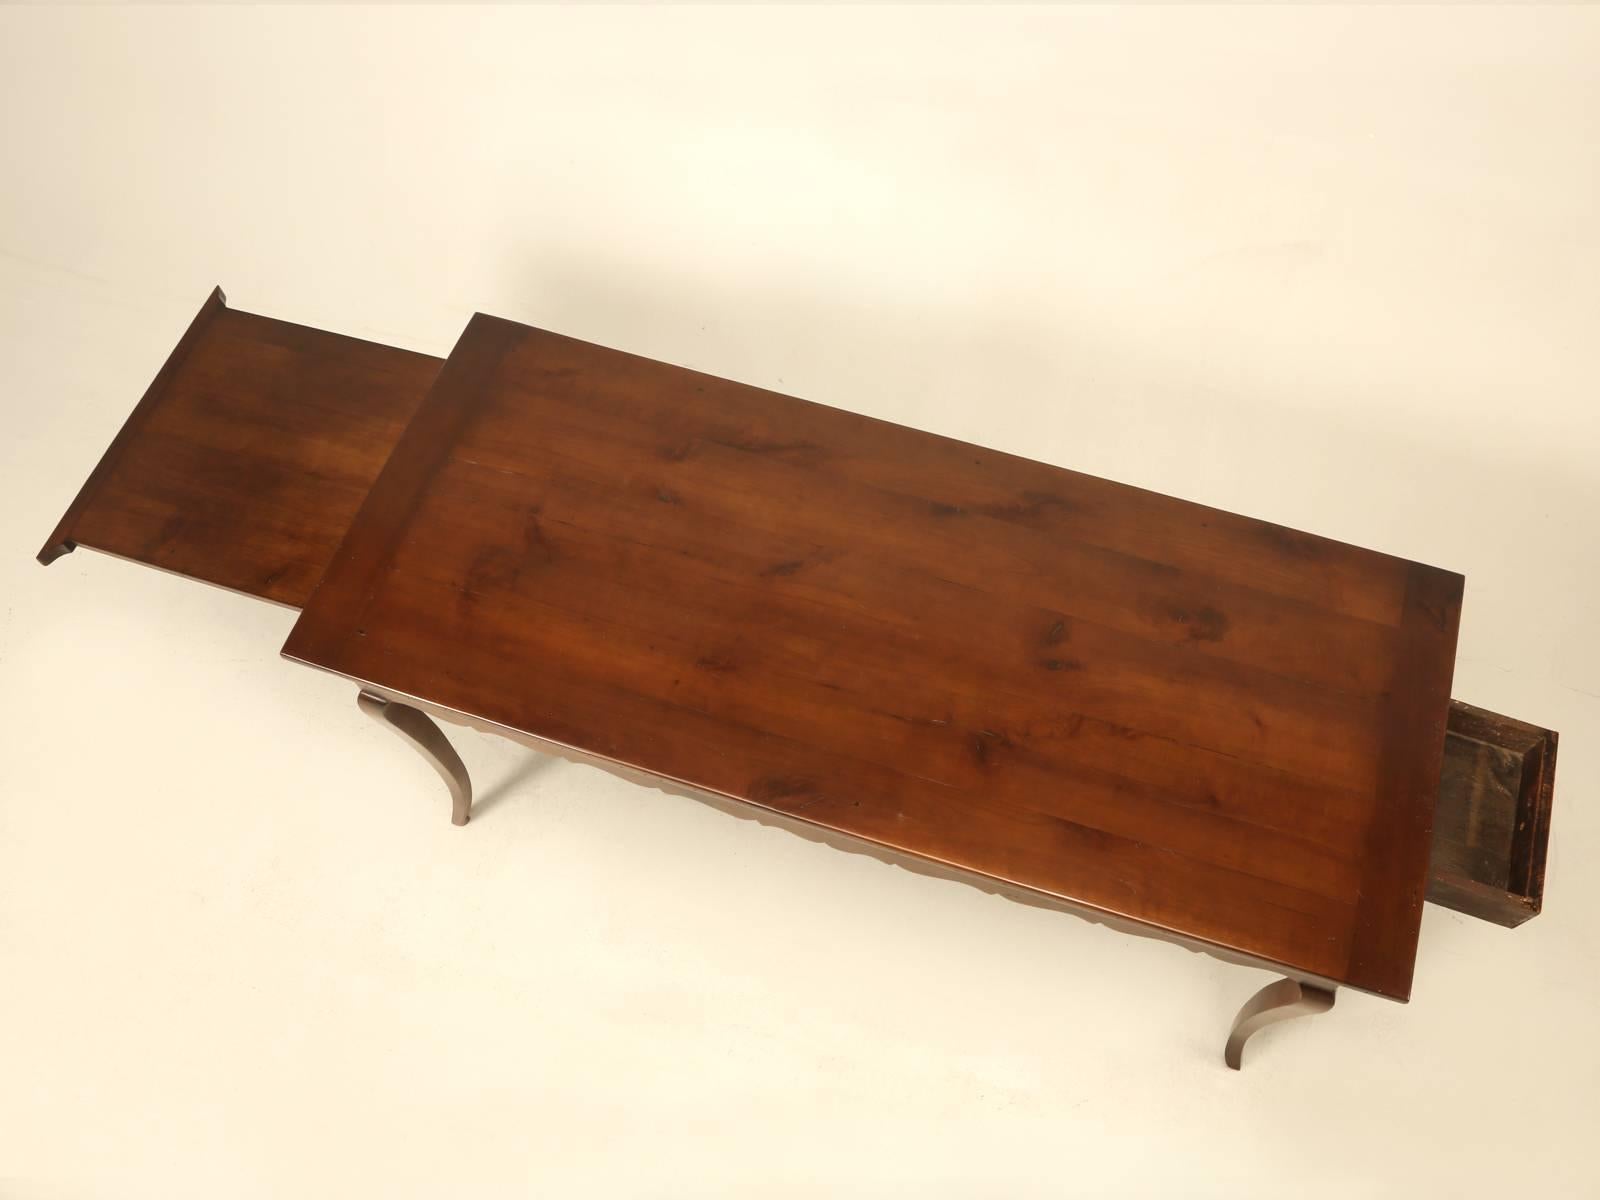 Now normally when I would look at this French dining table, I would immediately think it is 20th century, but after taking a much harder inspection, you immediately begin to notice things, like the thickness of the drawer, contrasting with the